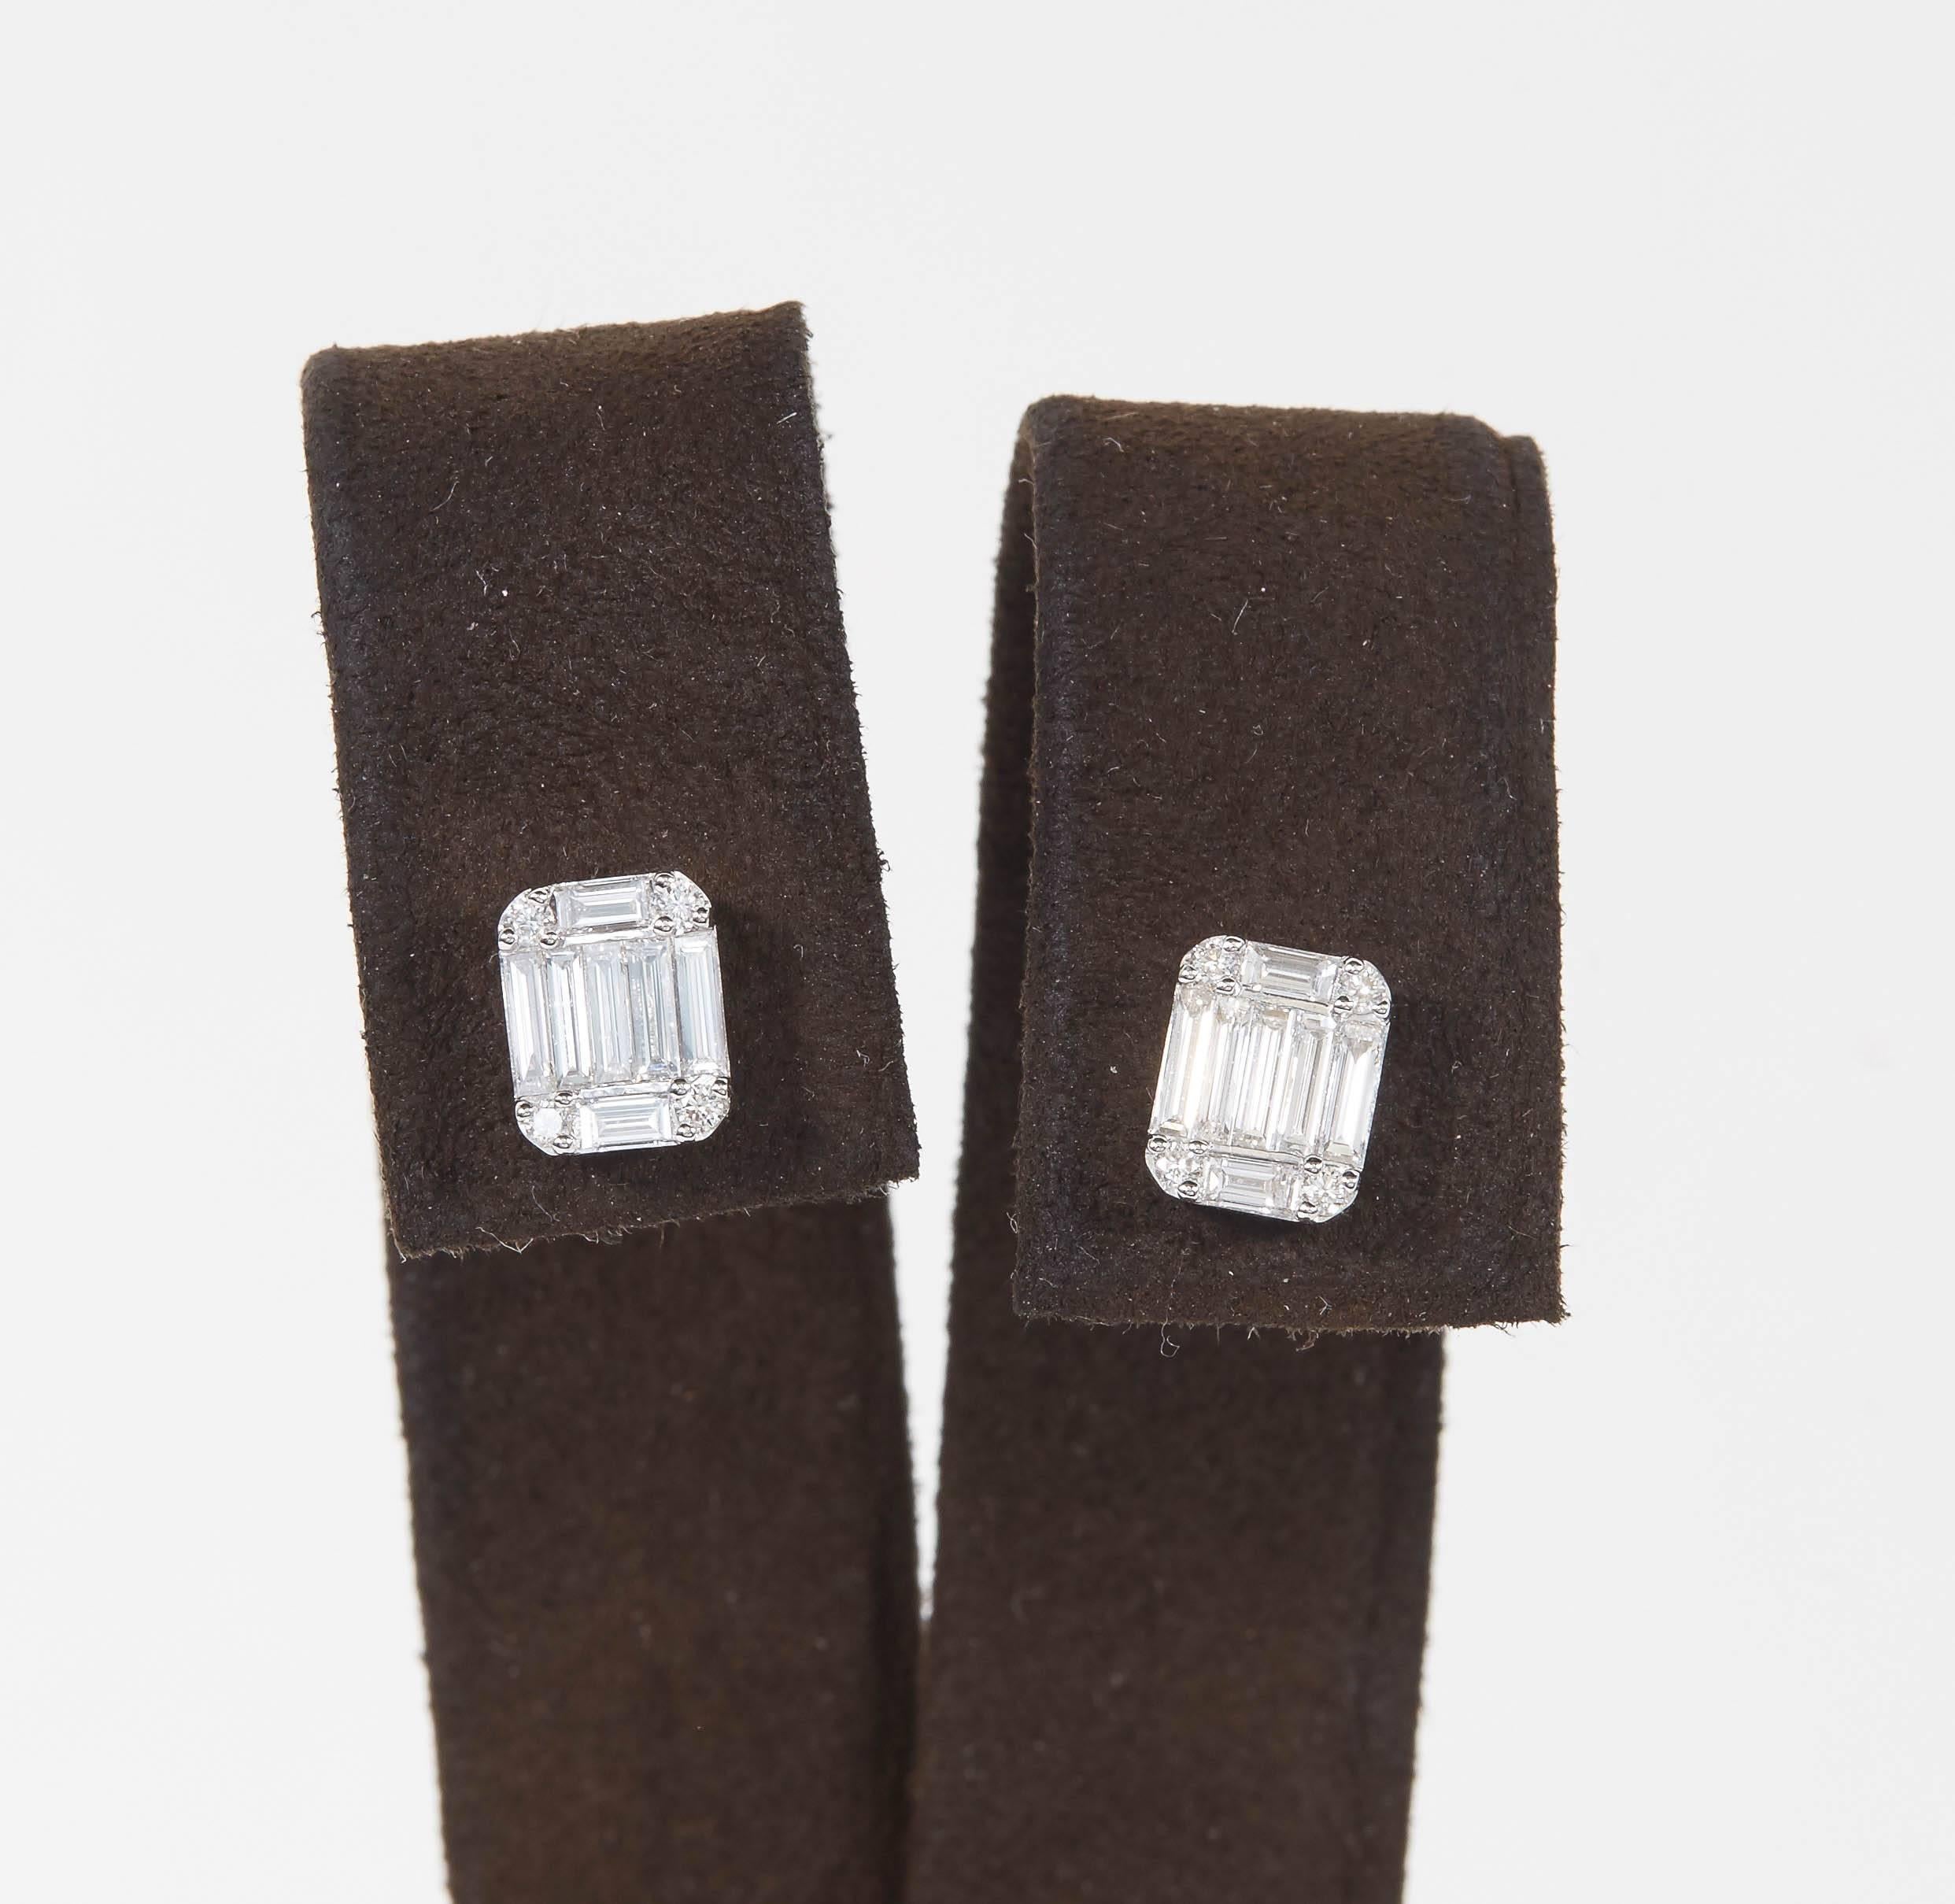 

A beautiful pair of diamond stud earrings. 

Made up of baguette and round cut diamonds, this earring has tons of sparkle and gives the look of one emerald cut diamond. 

1.01 carats of F VS diamonds set in 18k white gold.

Approximately 7.9 mm x